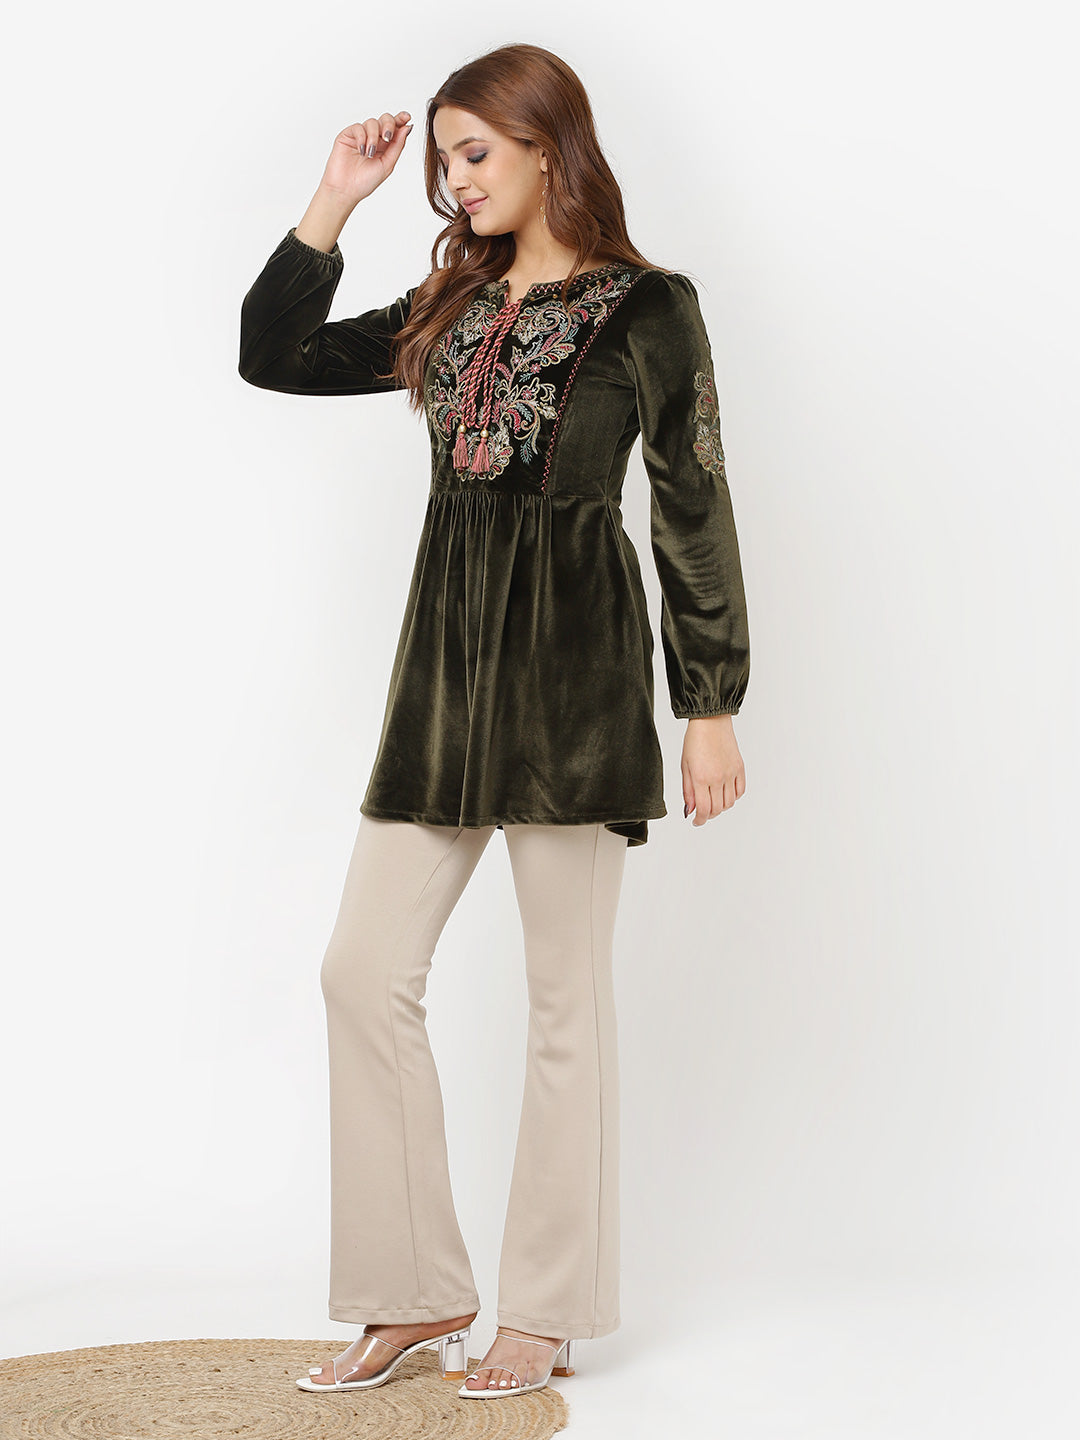 Olive Velvet Tunic with Threadwork and Tassels